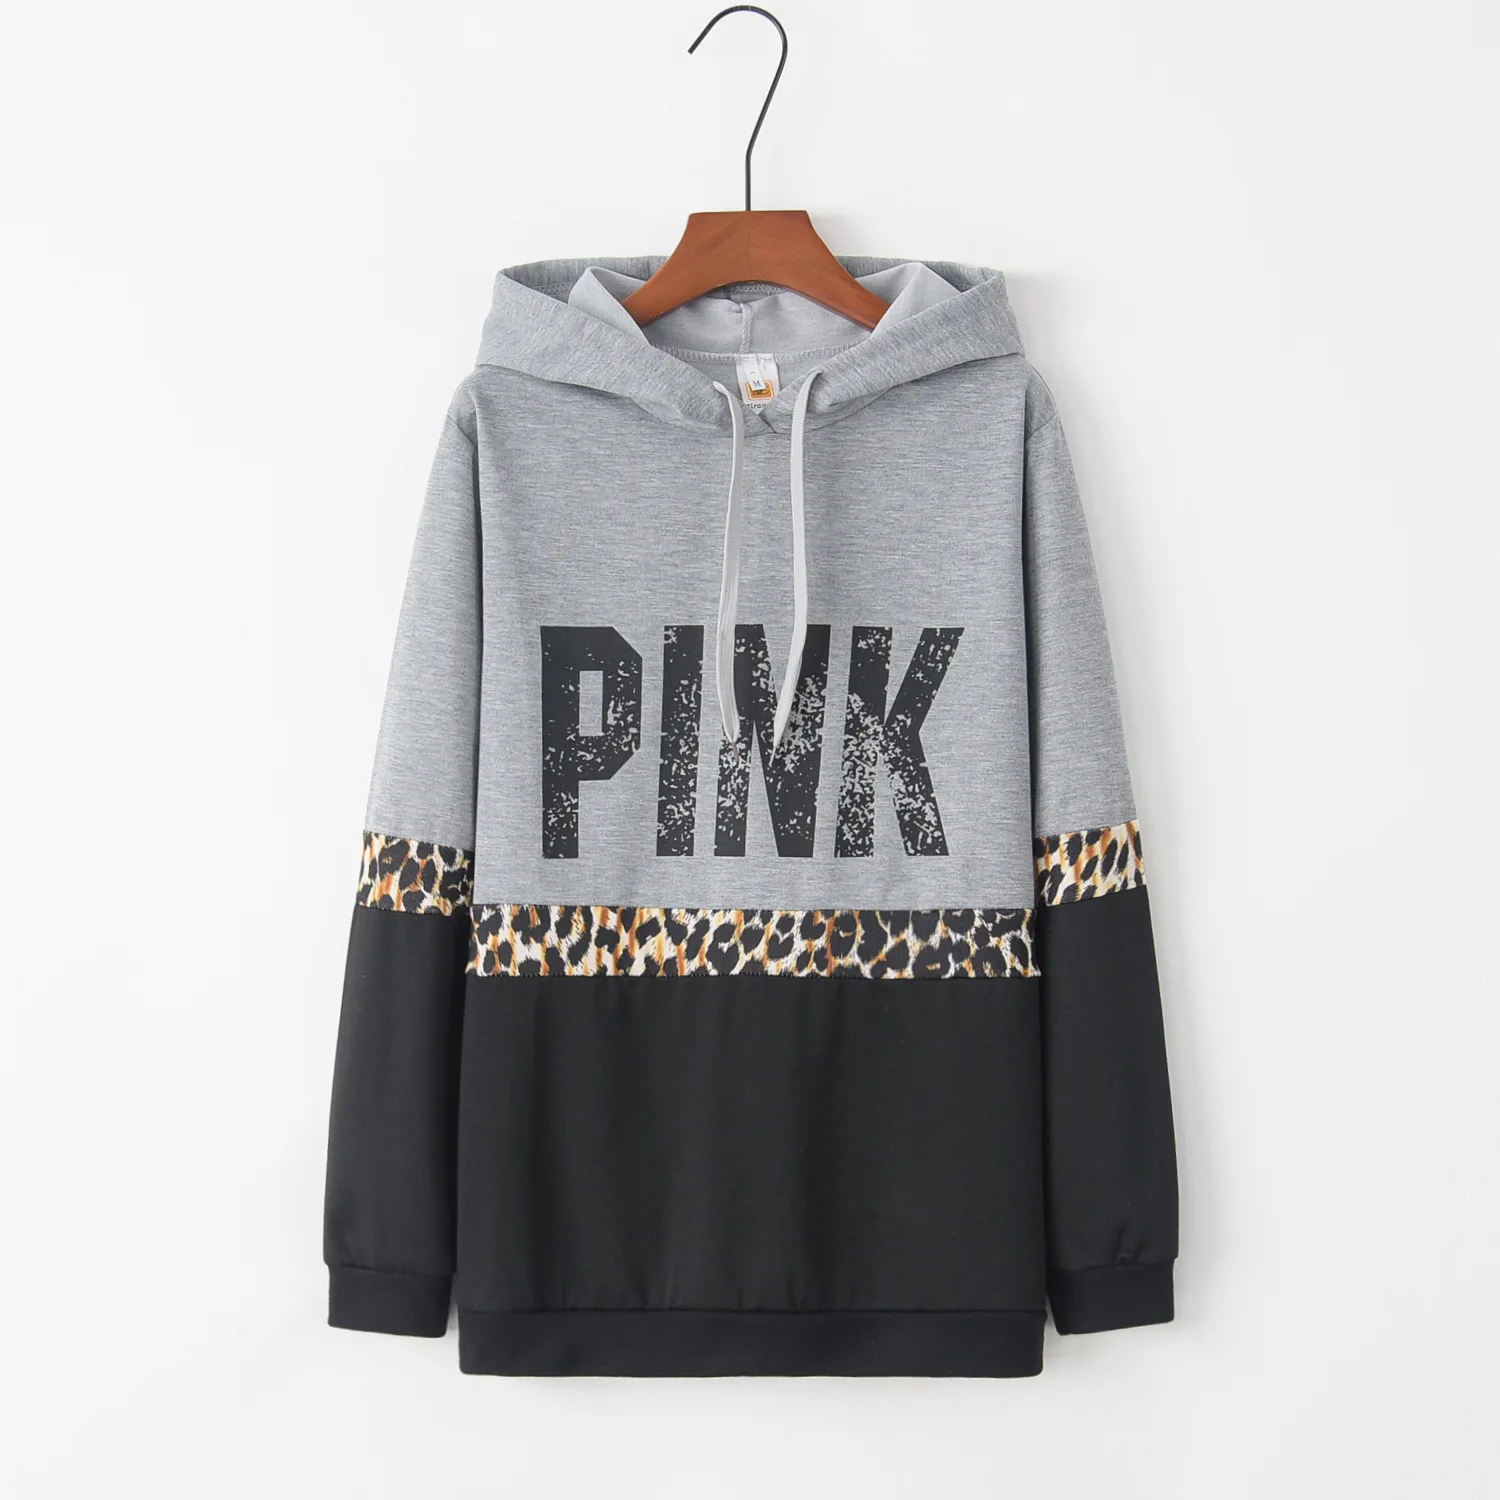 2023 Ladies PINK Letter Print Full Sleeve Hooded Sweatshirt Leopard Print Black Grey Casual Costume New Arrival Cotton Women Top 2023 new arrival ladies slim fit black blazer patchwork design buttoned suit jacket perfect for fashionable and elegant look